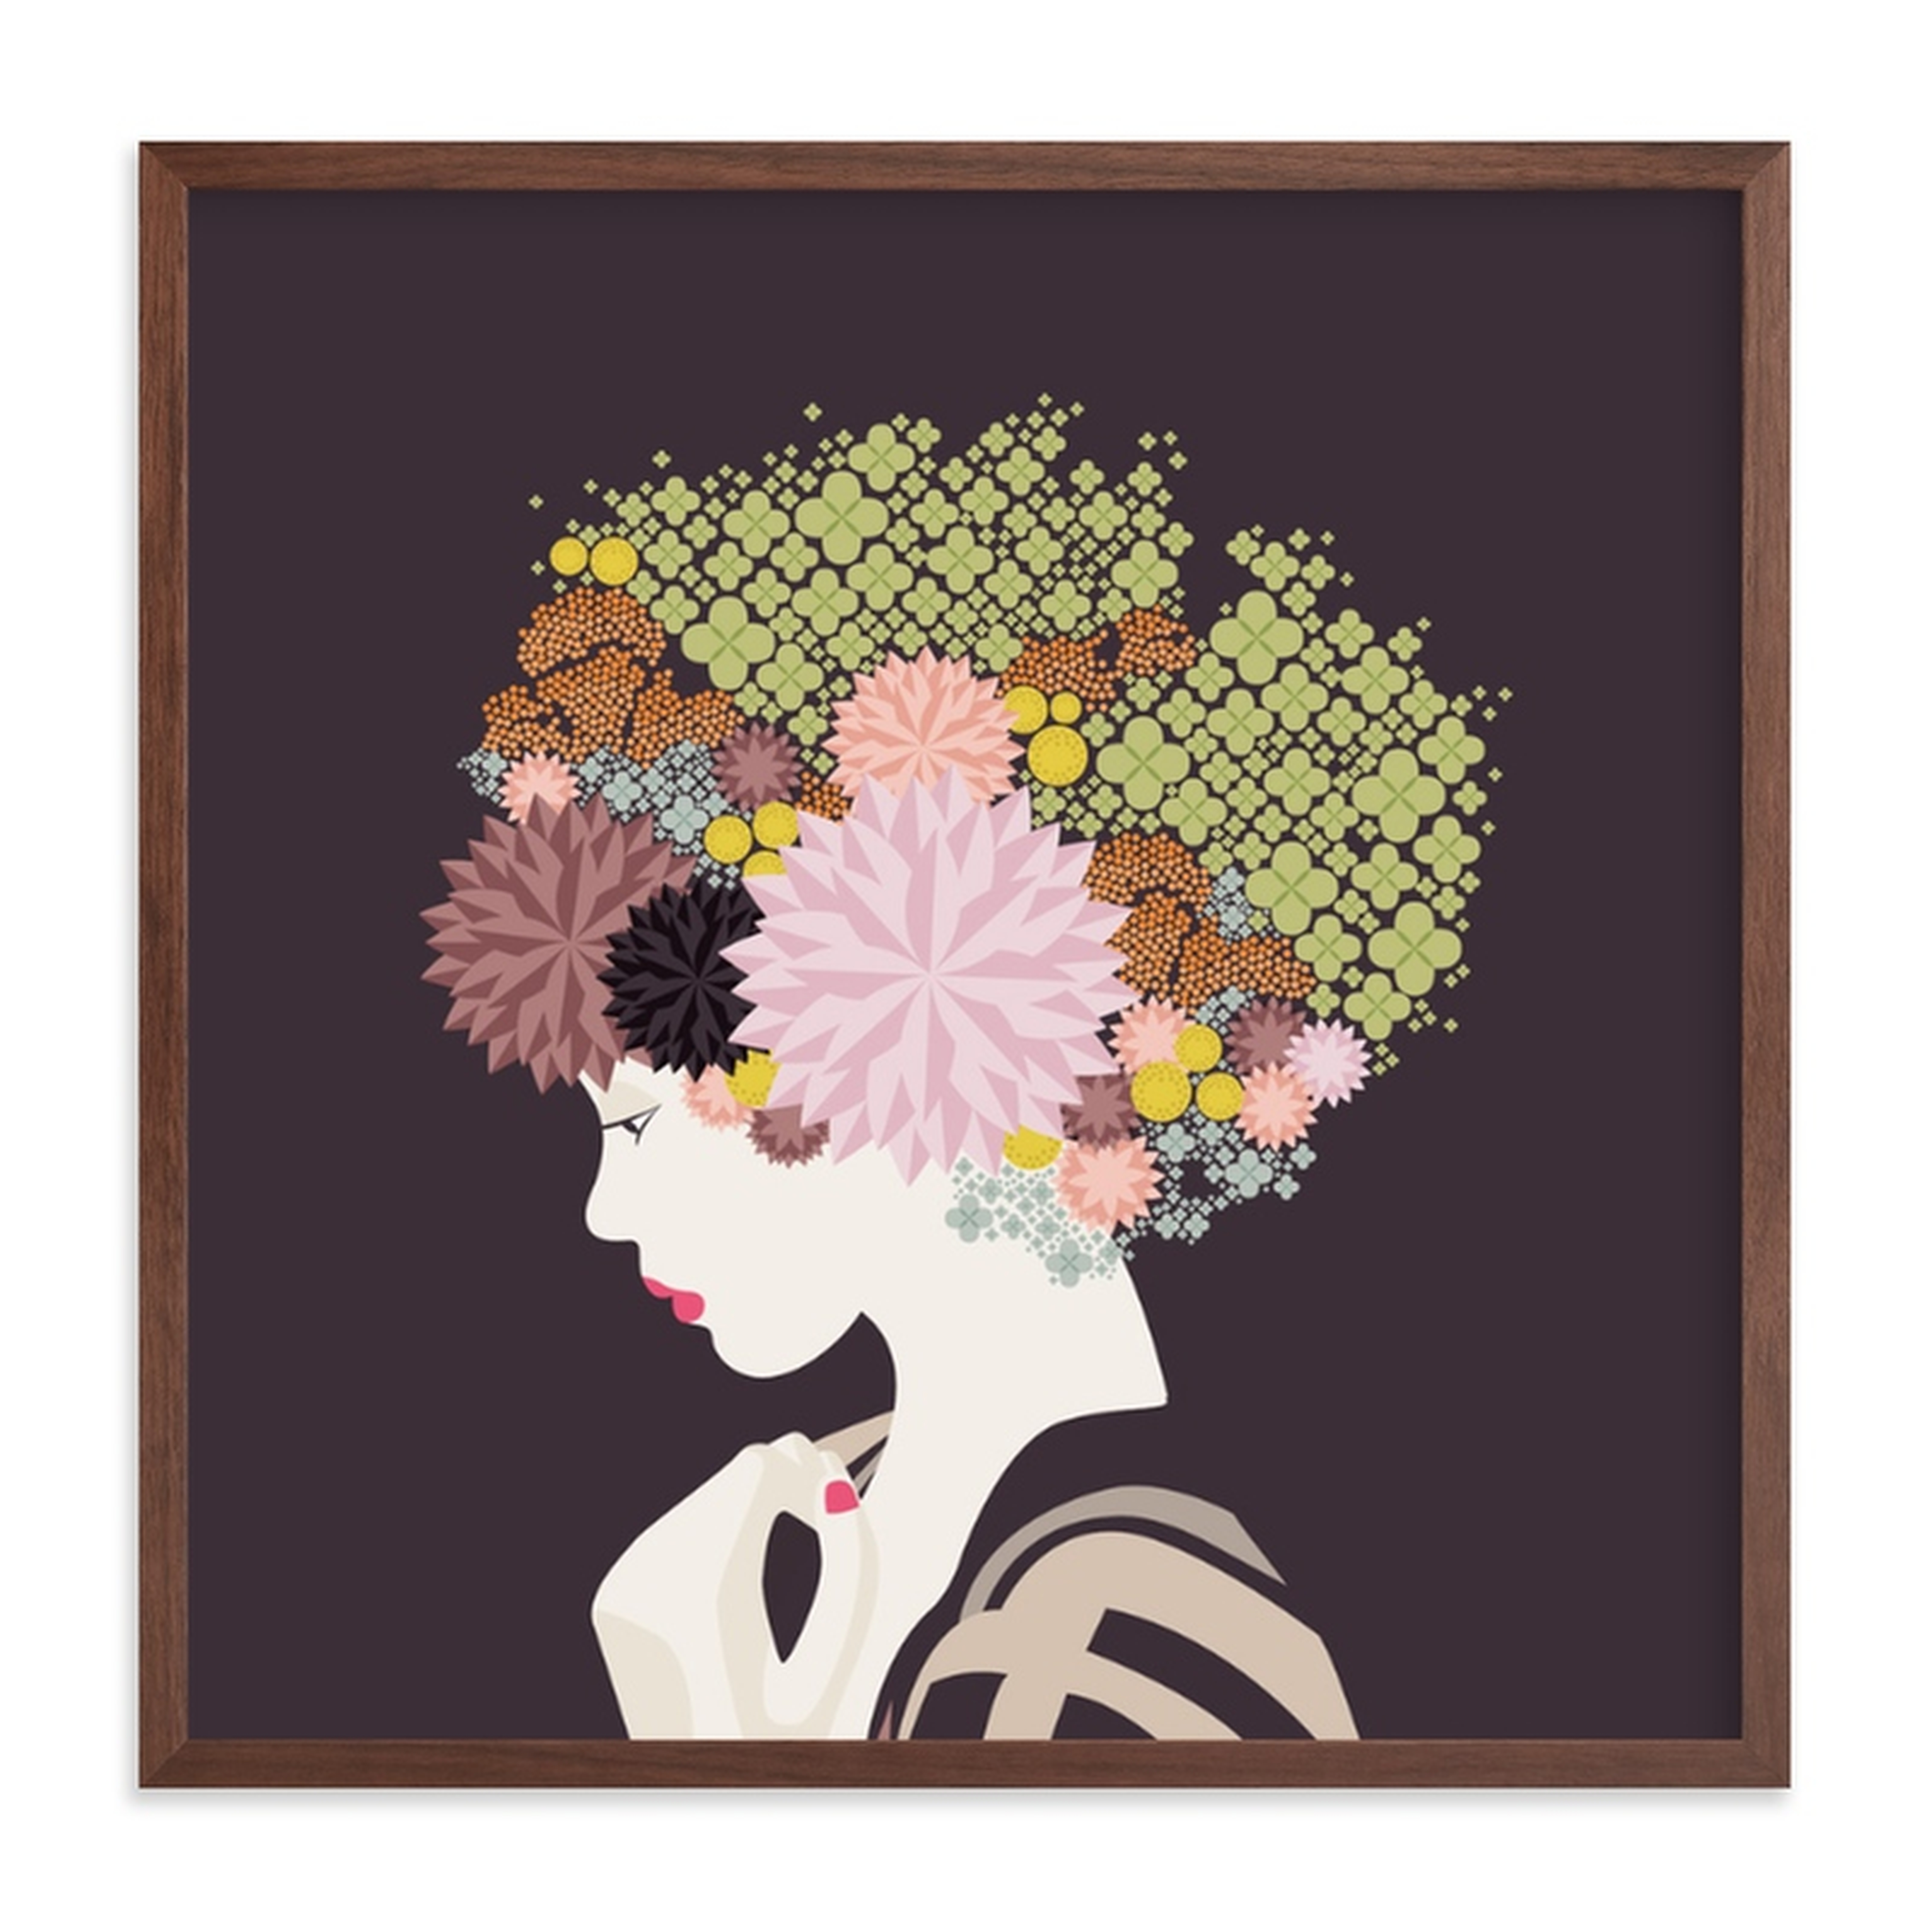 I'd Rather Wear Flowers Limited Edition Fine Art Print - Minted